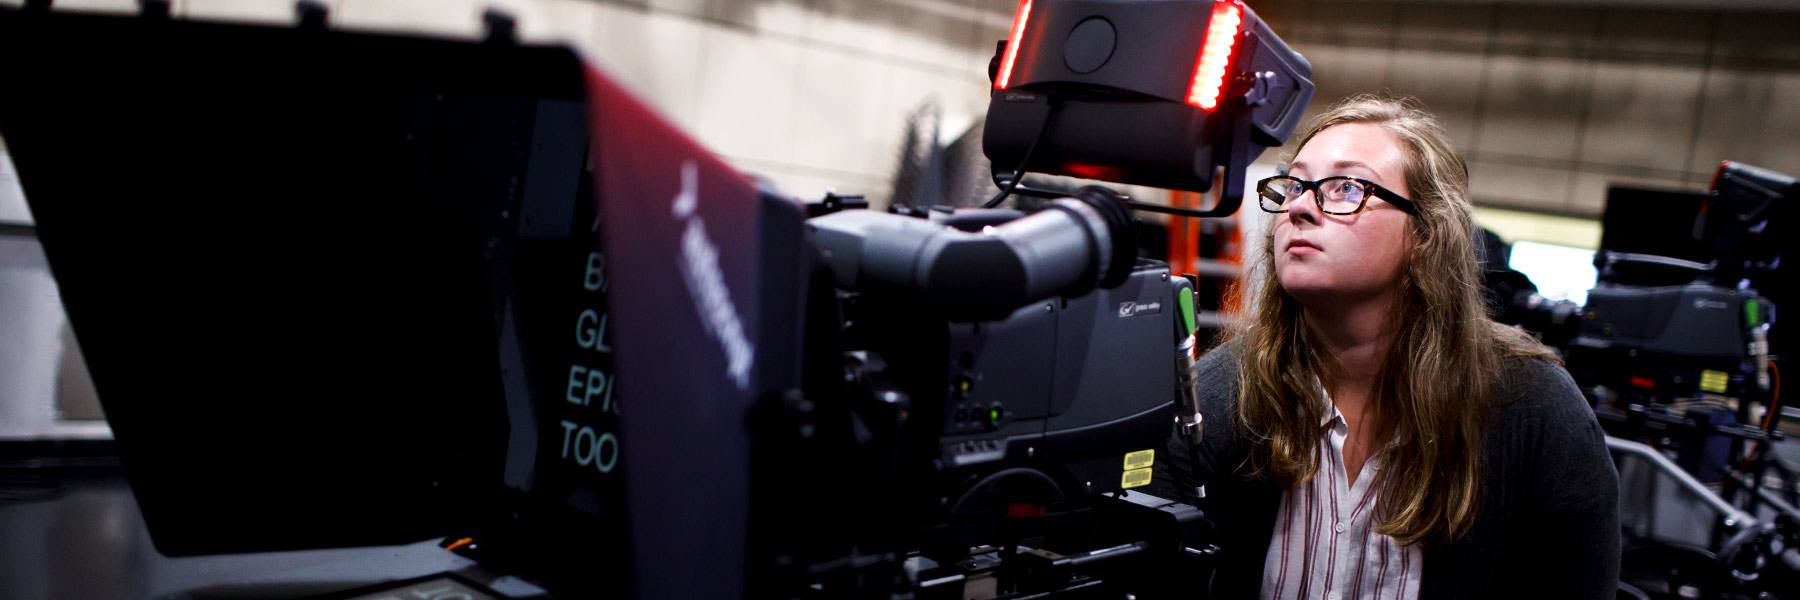 A student sits behind a TV camera.